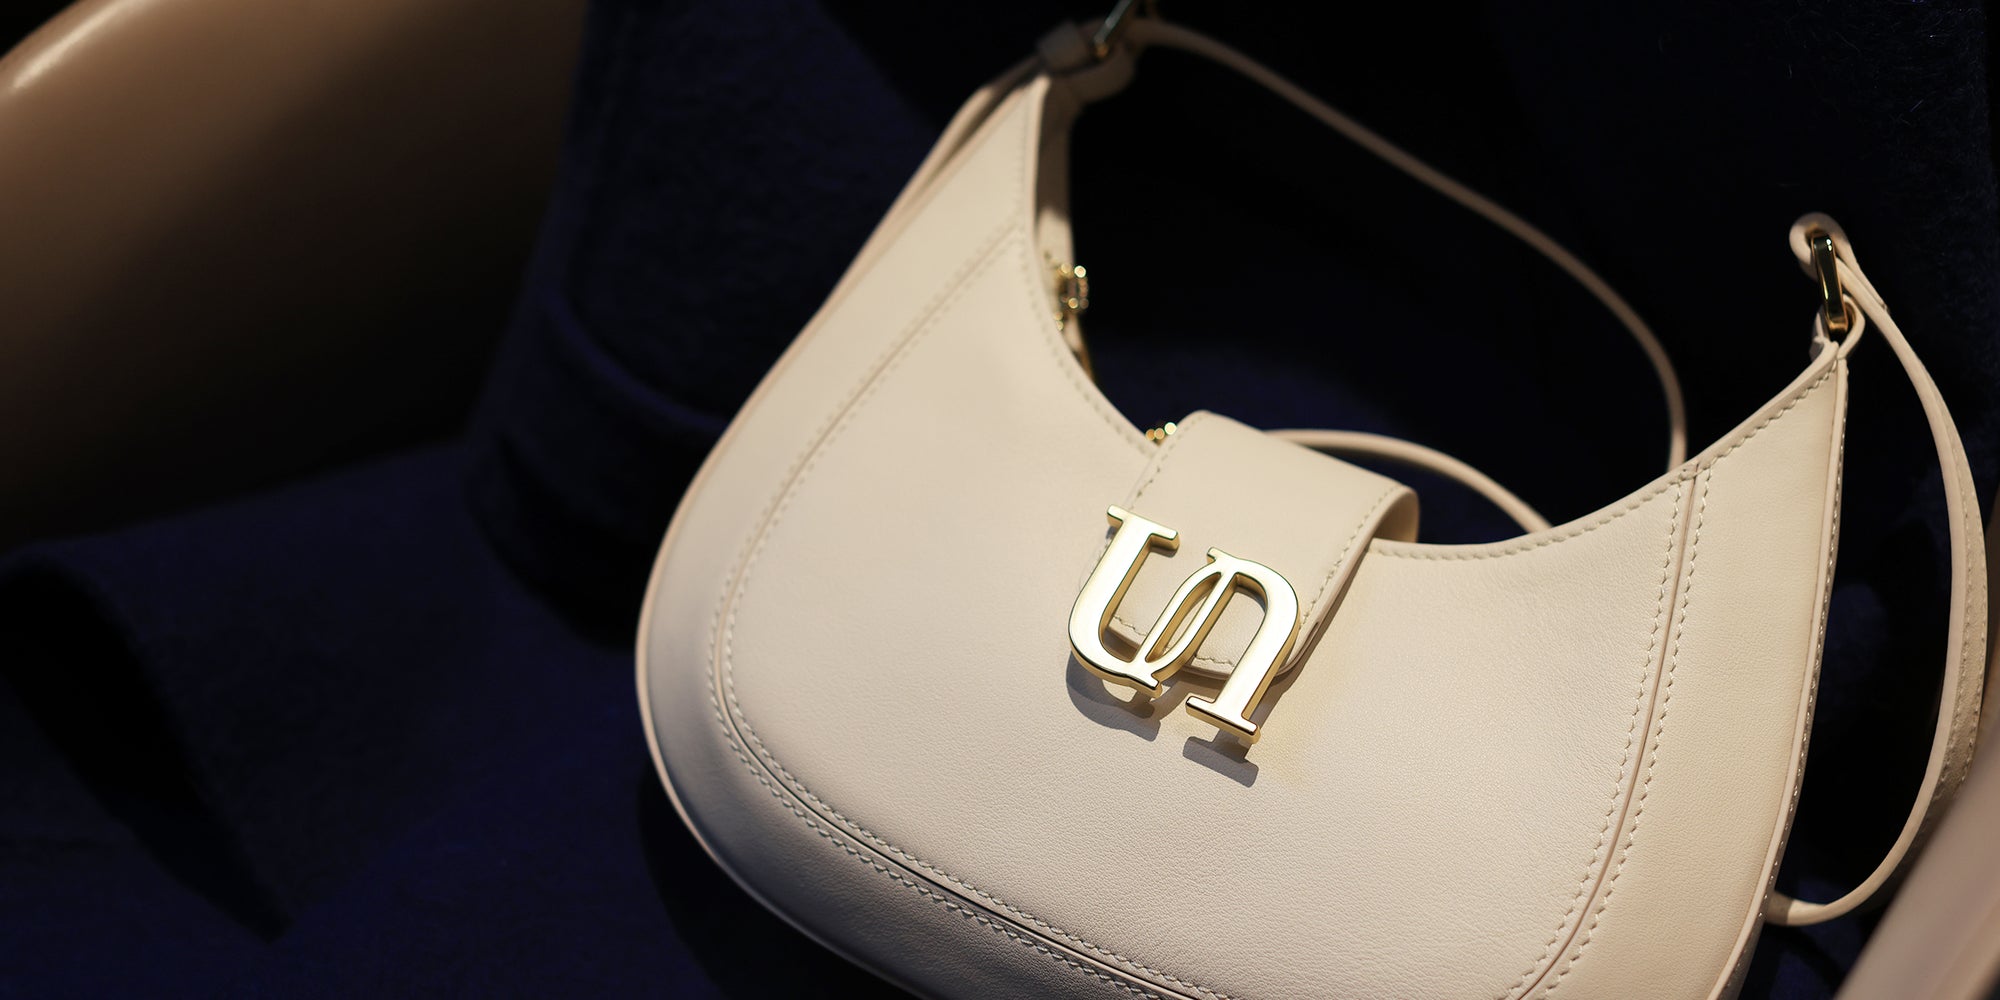 Unitude  Women Bags - Minimalist Bags for Everyday Use